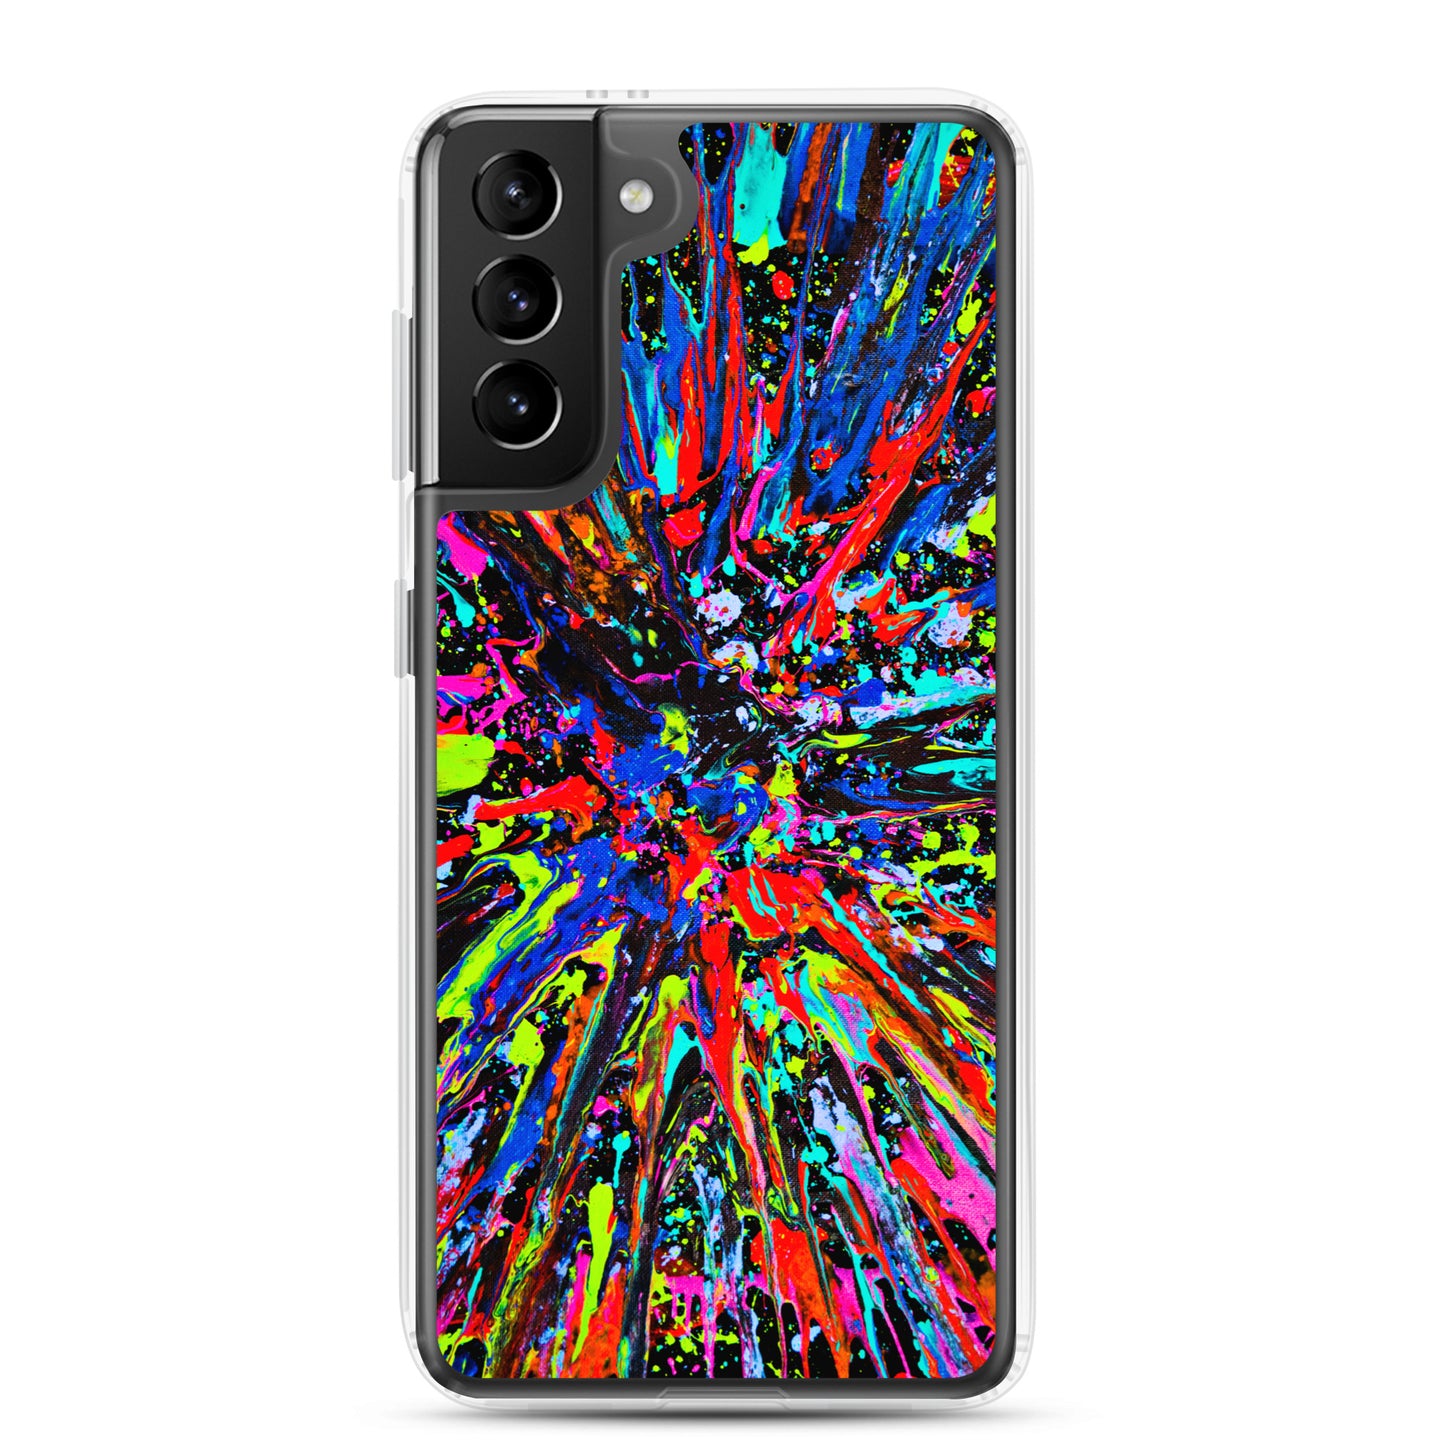 NightOwl Studio Custom Phone Case Compatible with Samsung Galaxy, Slim Cover for Wireless Charging, Drop and Scratch Resistant, Splatter